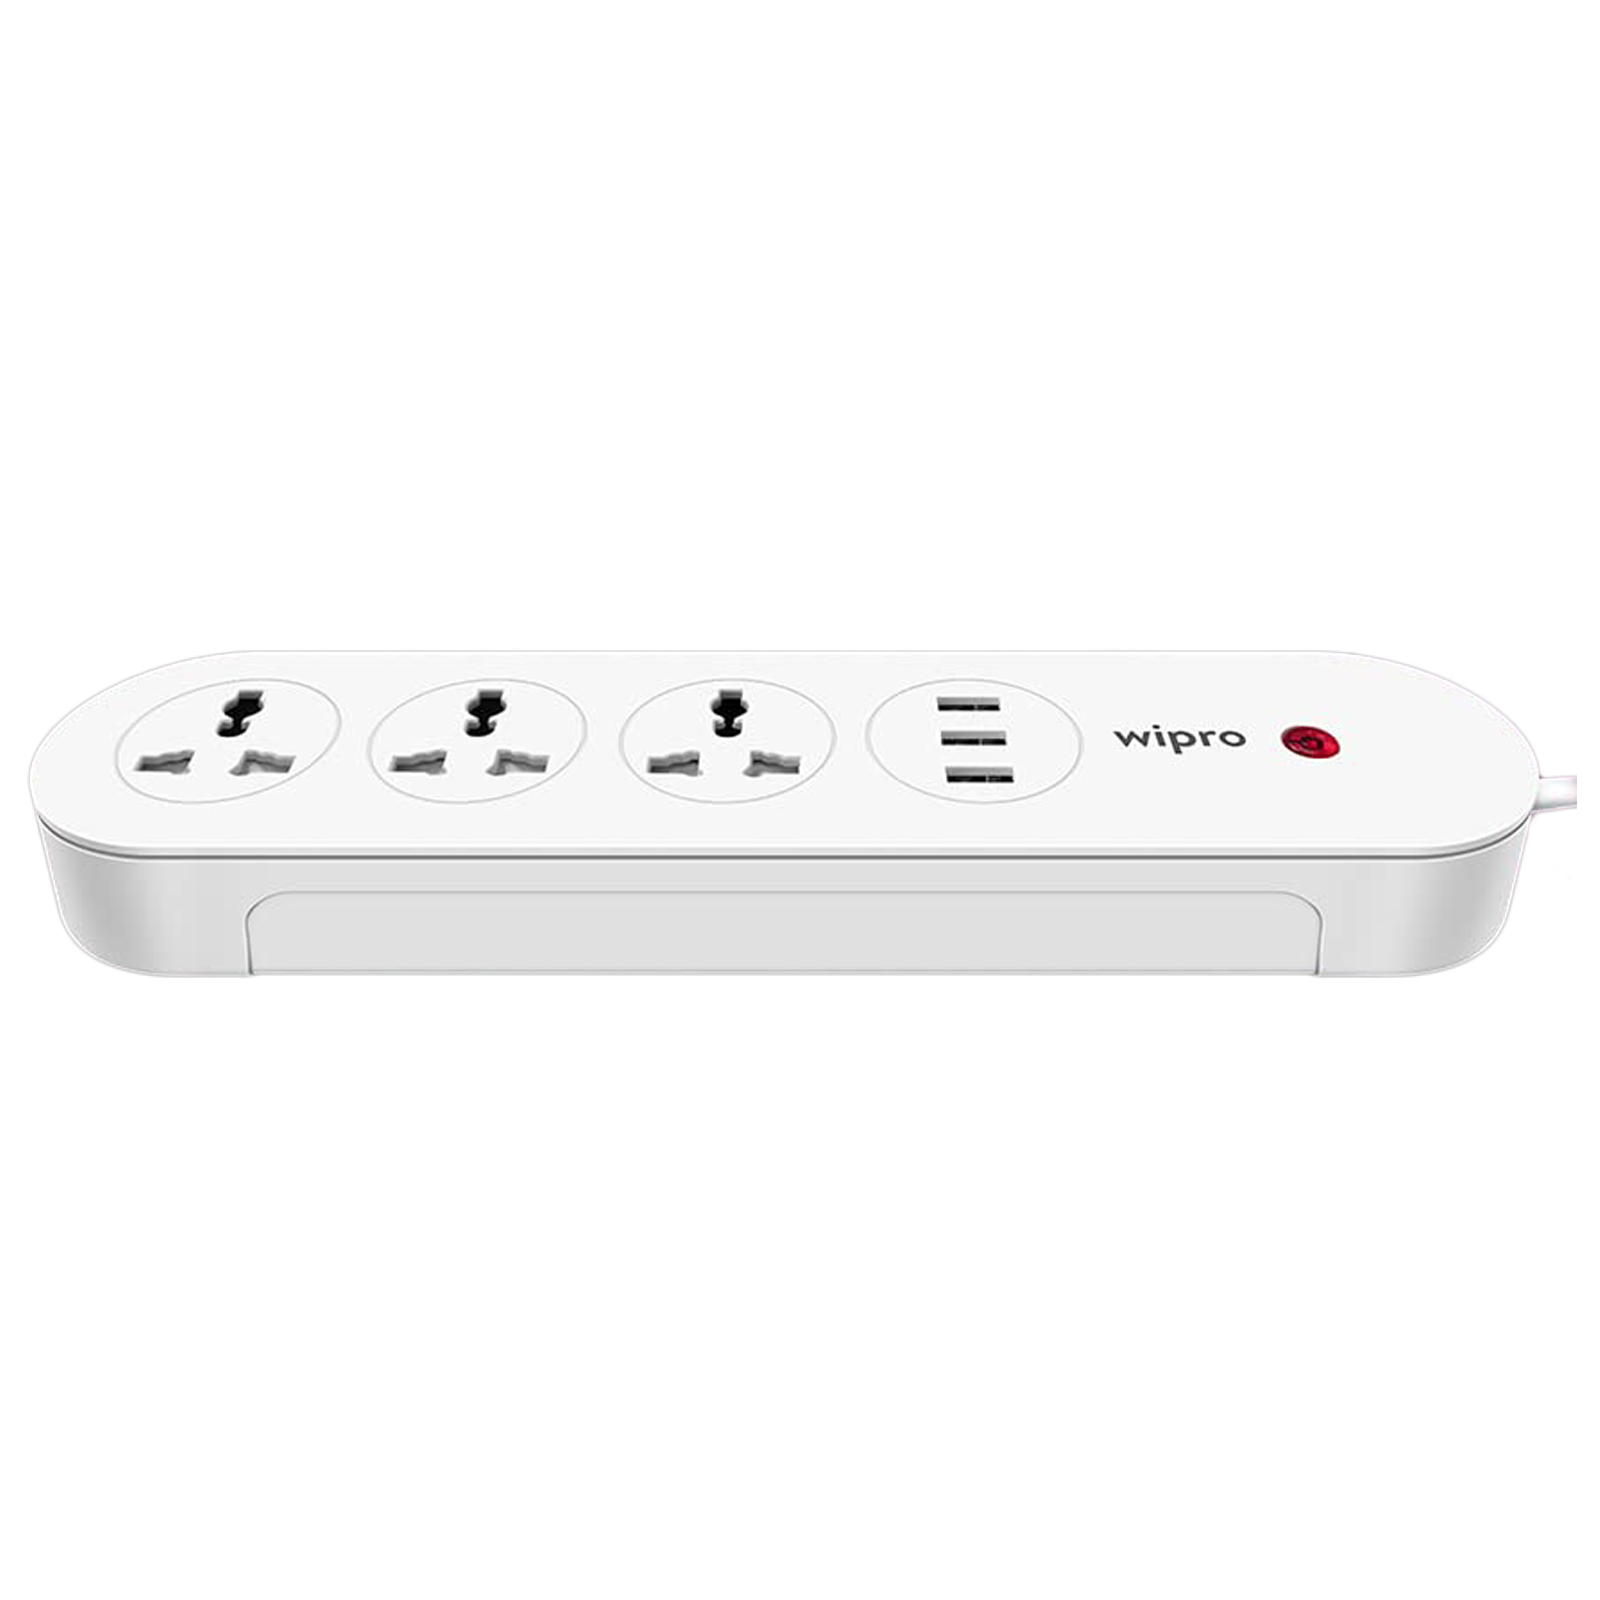 Wipro 3 Sockets Smart Extension Board (Qualcomm Quick Charge 3.0, DSE3150, White)